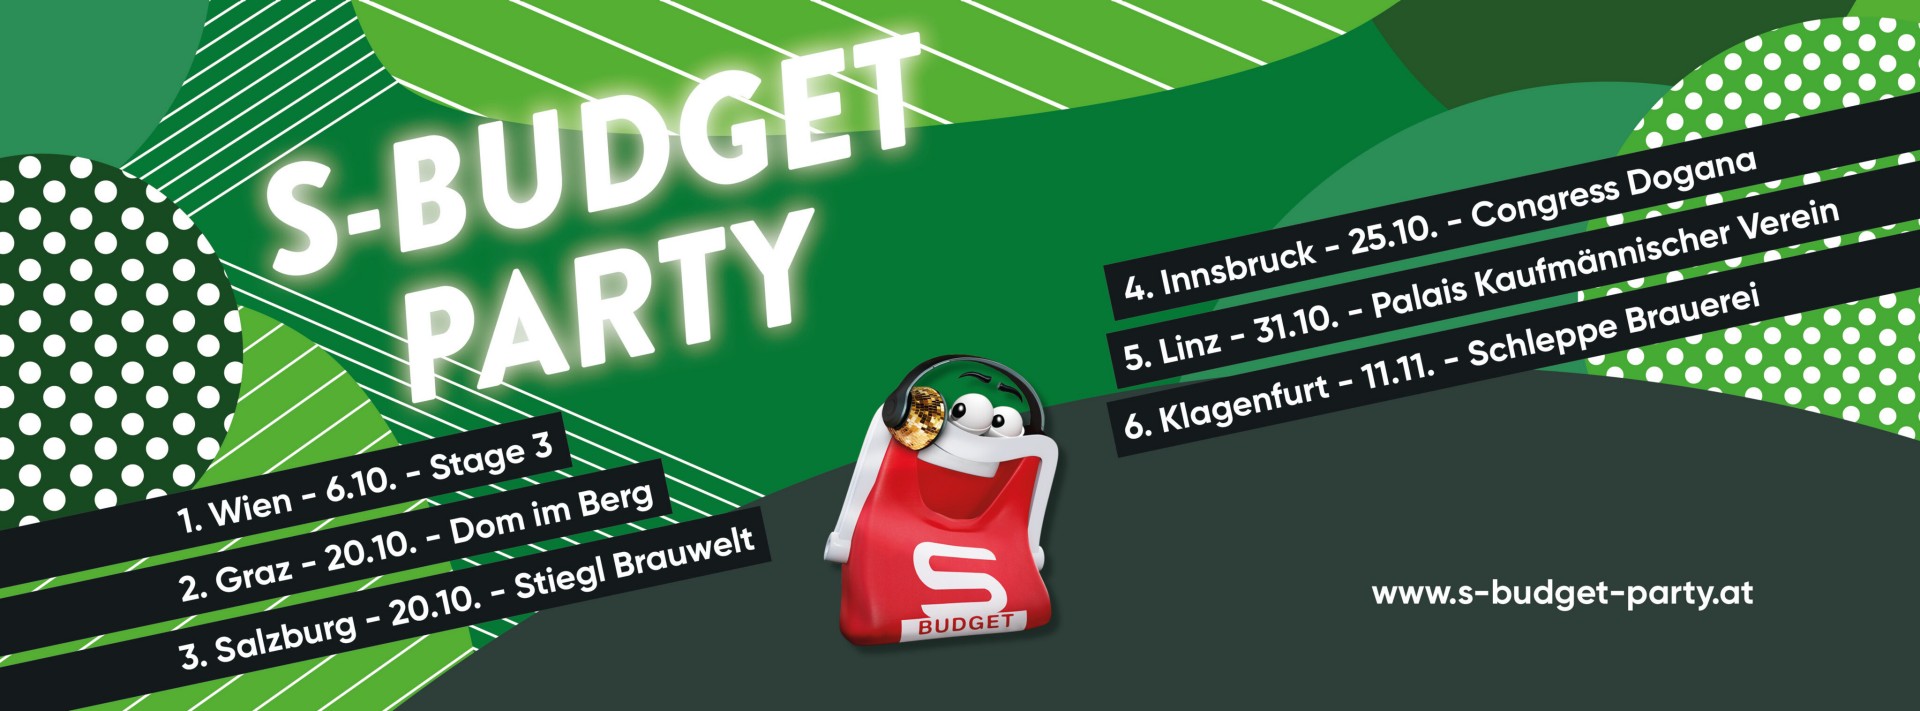 S-BUDGET Party